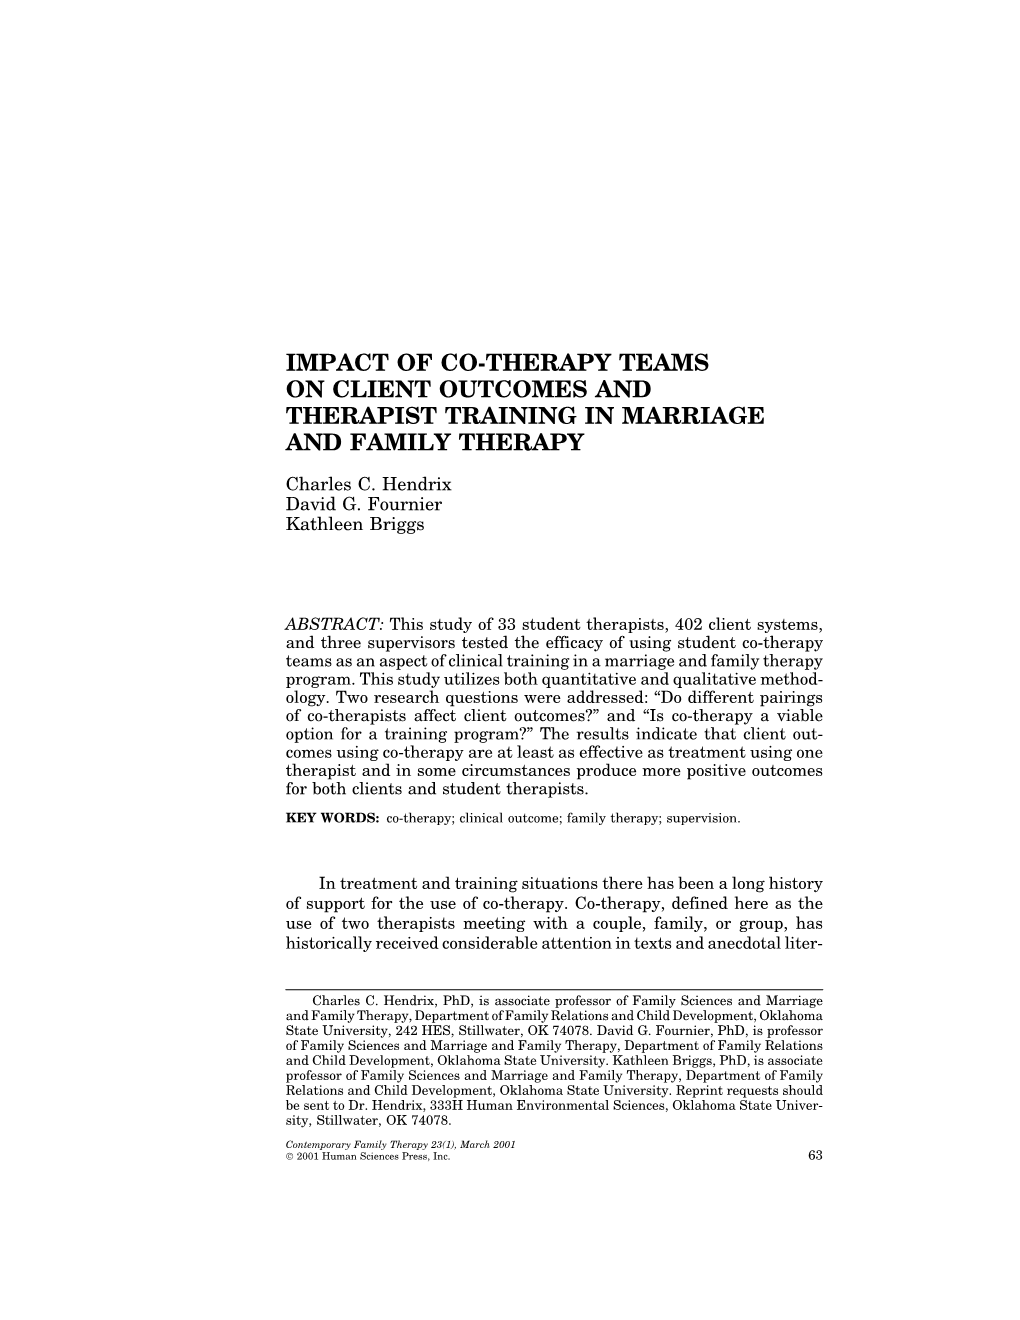 Impact of Co-Therapy Teams on Client Outcomes and Therapist Training in Marriage and Family Therapy